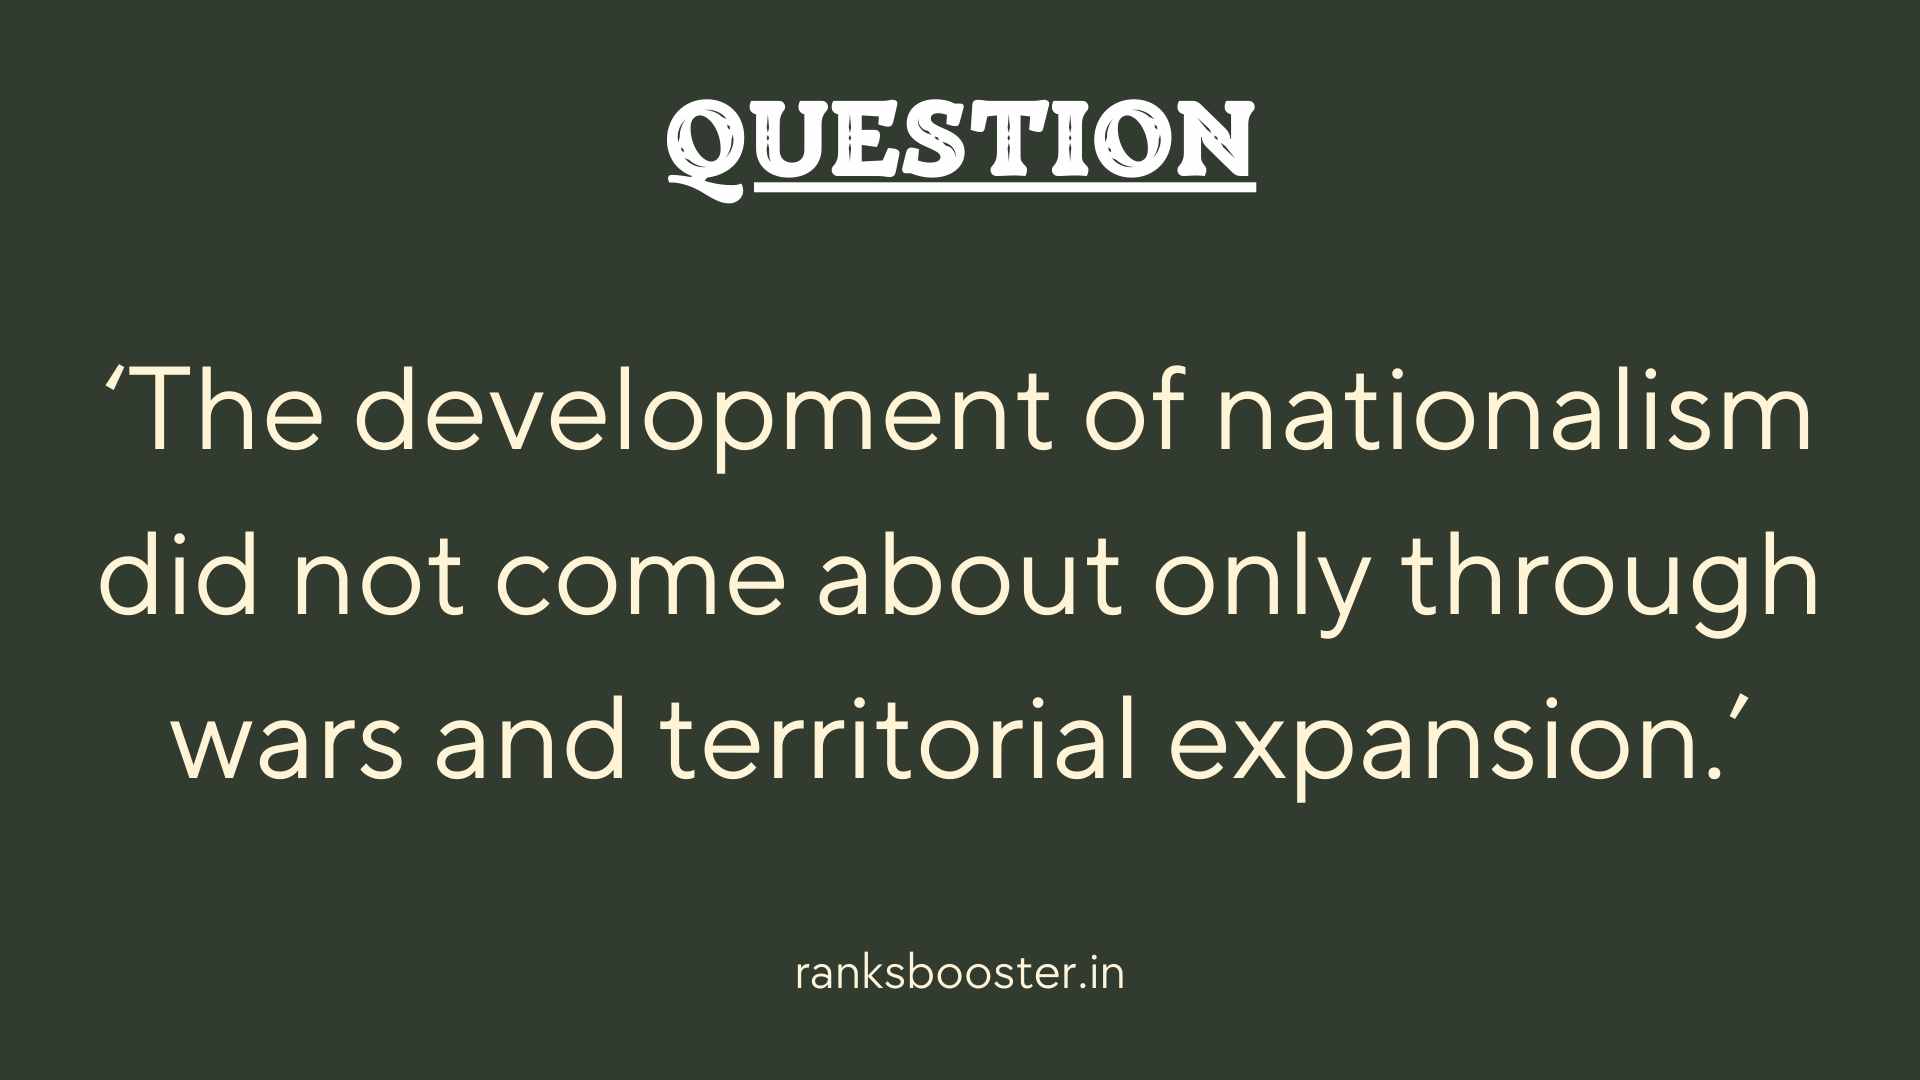 Question: ‘The development of nationalism did not come about only through wars and territorial expansion.’